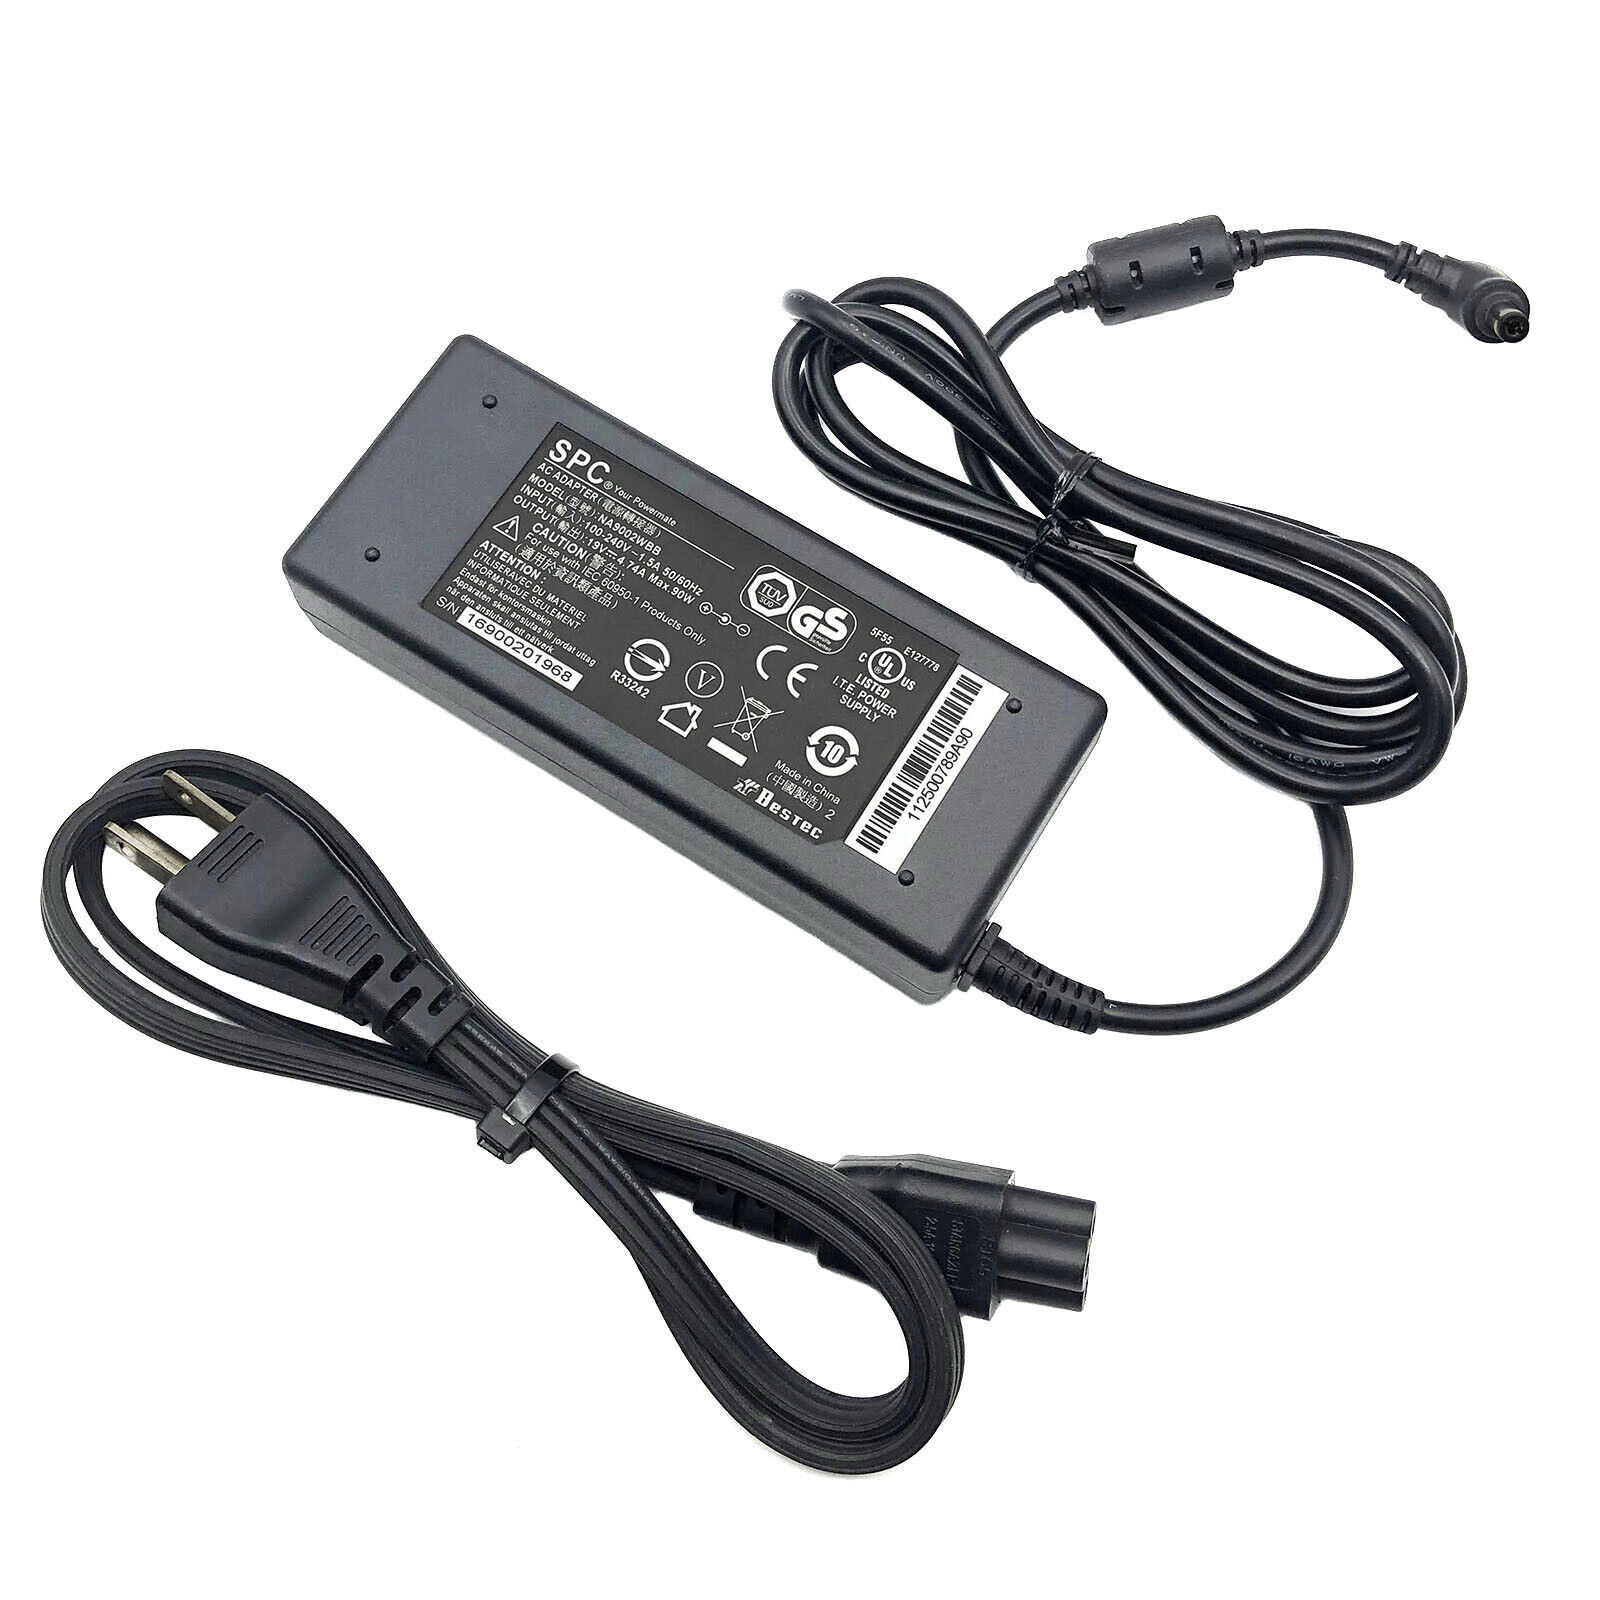 New Genuine SPC AC Charger Adapter for ASUS W-Series W1NA W1VB Laptops w/Cord